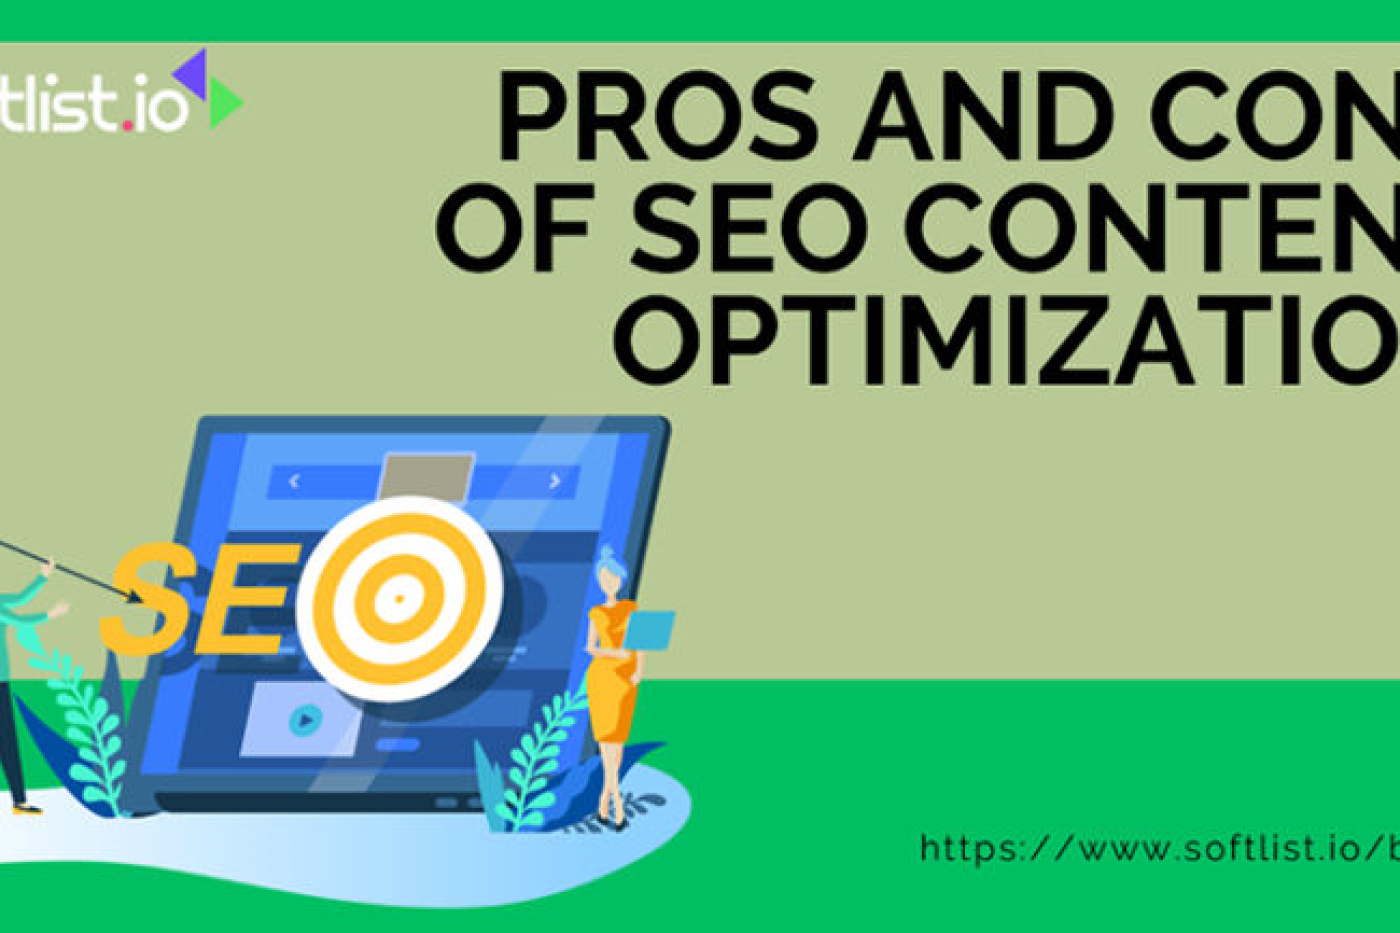 The Pros and Cons of SEO Content Optimization